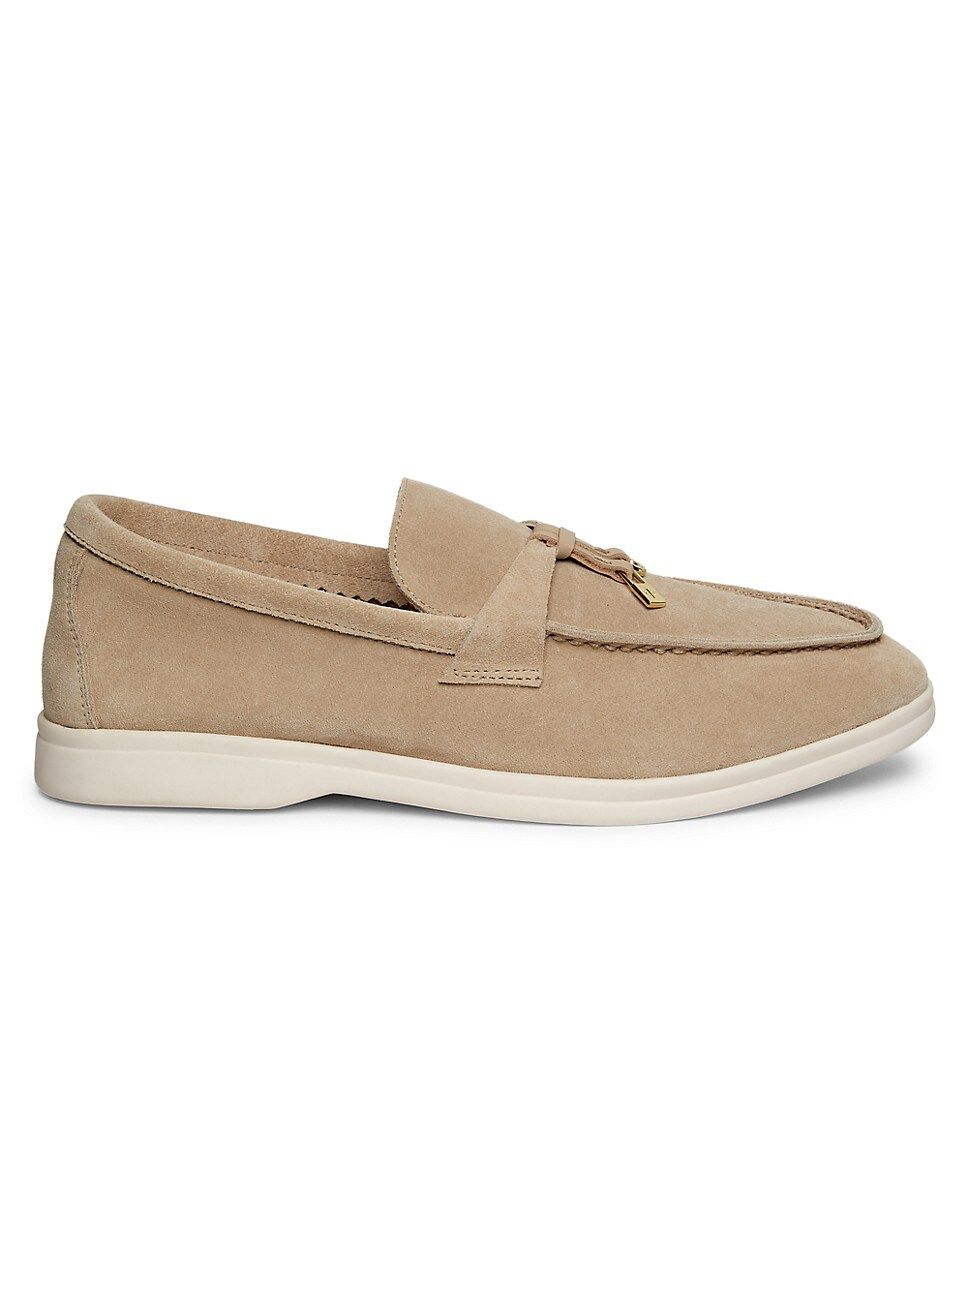 Summer Charms Walk Suede Moccasins | Saks Fifth Avenue